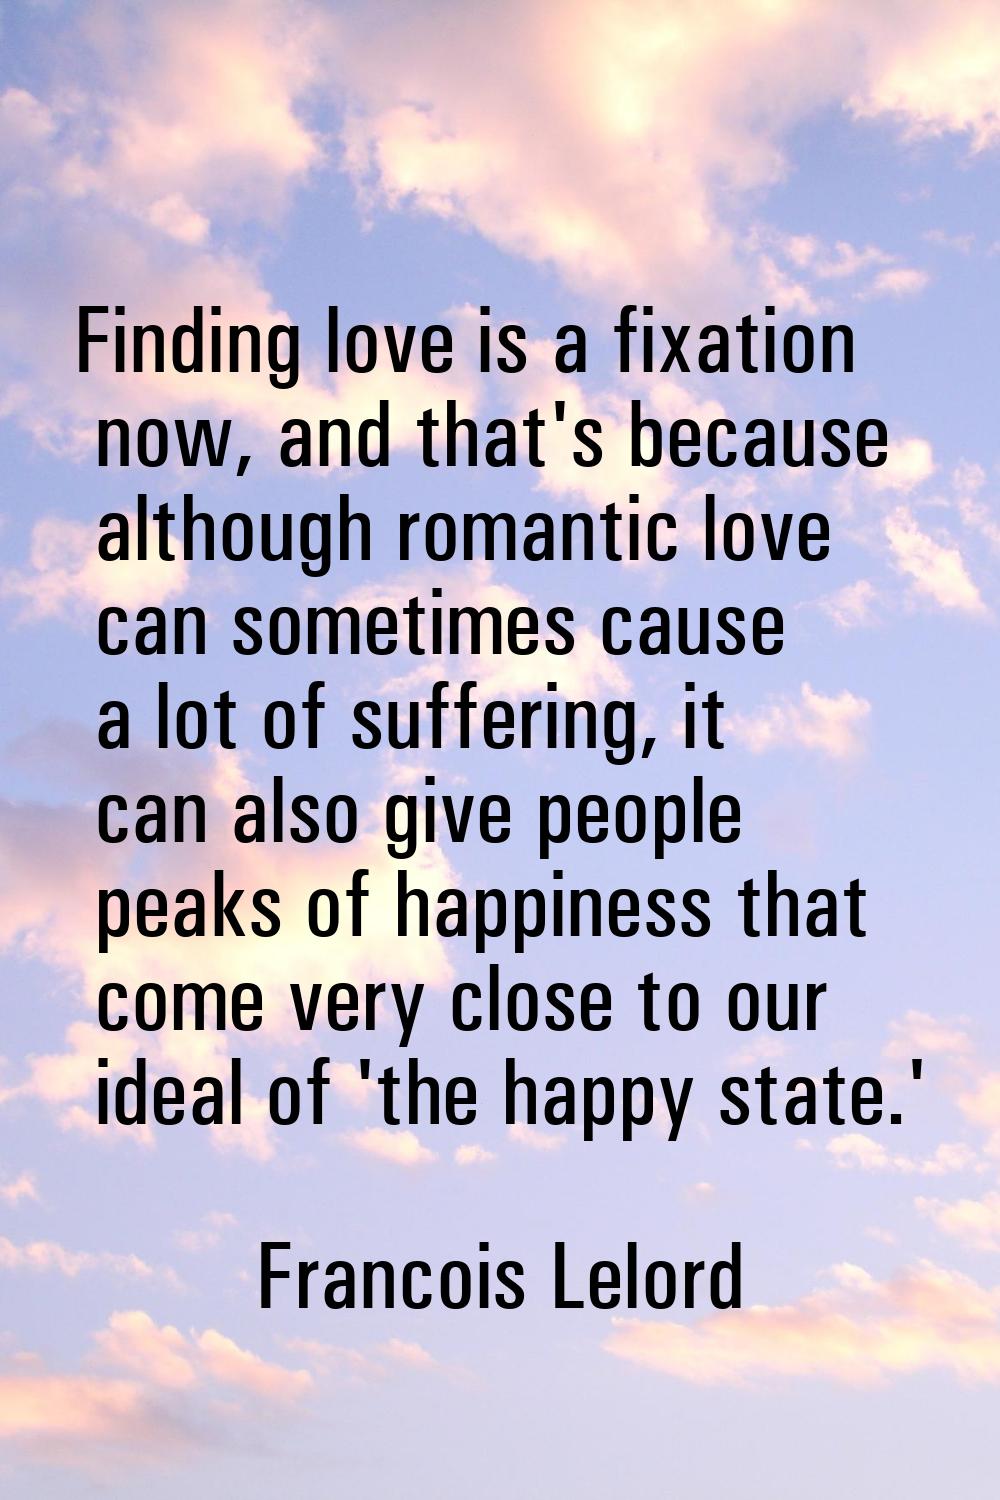 Finding love is a fixation now, and that's because although romantic love can sometimes cause a lot